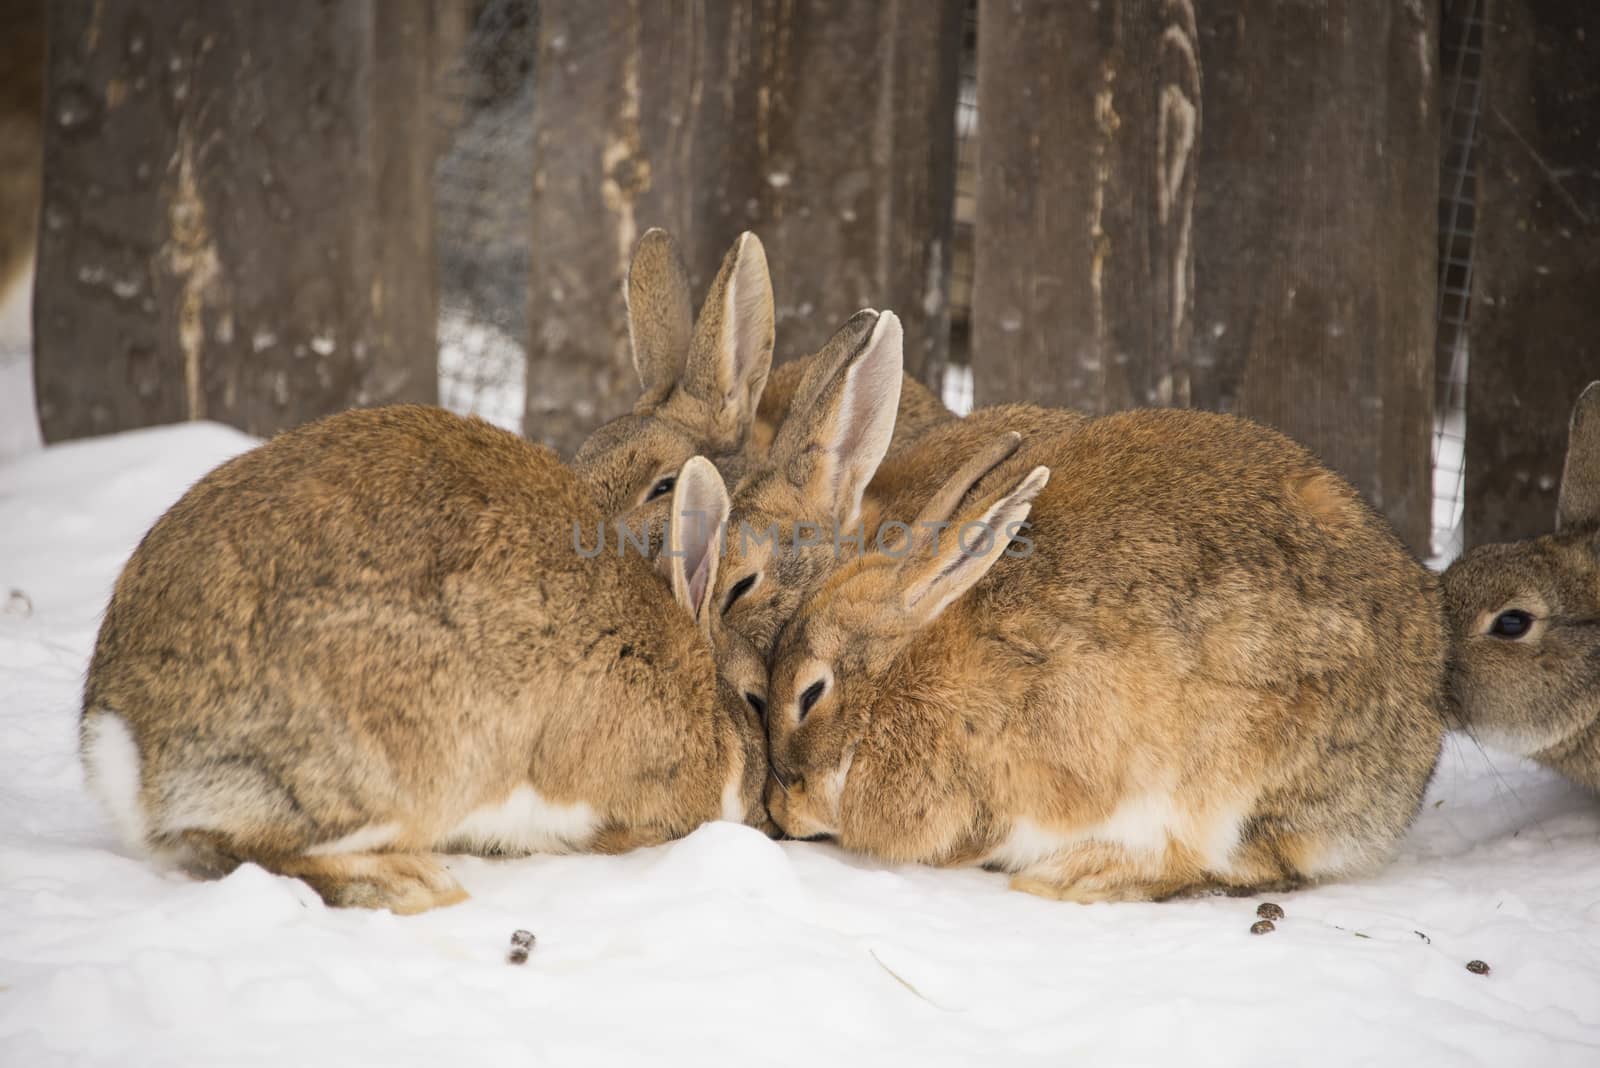 A herd of brown rabbits in the snow